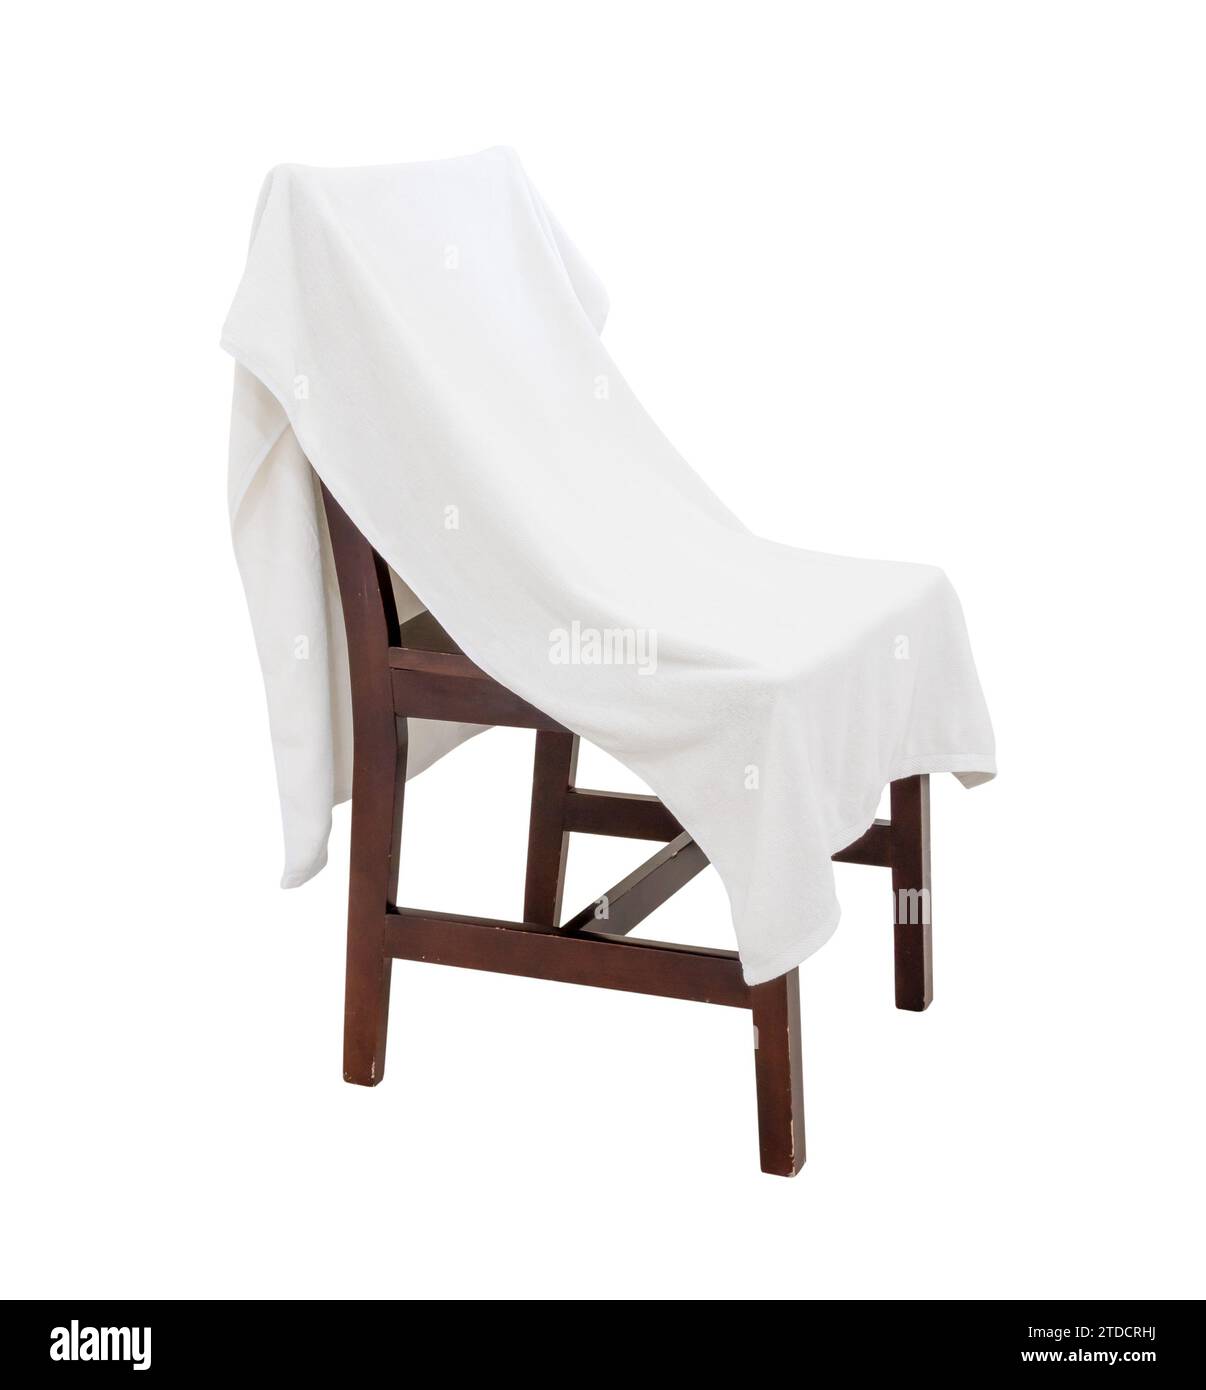 Used white towel laying on wooden chair is isolated on white background with clipping path. Stock Photo